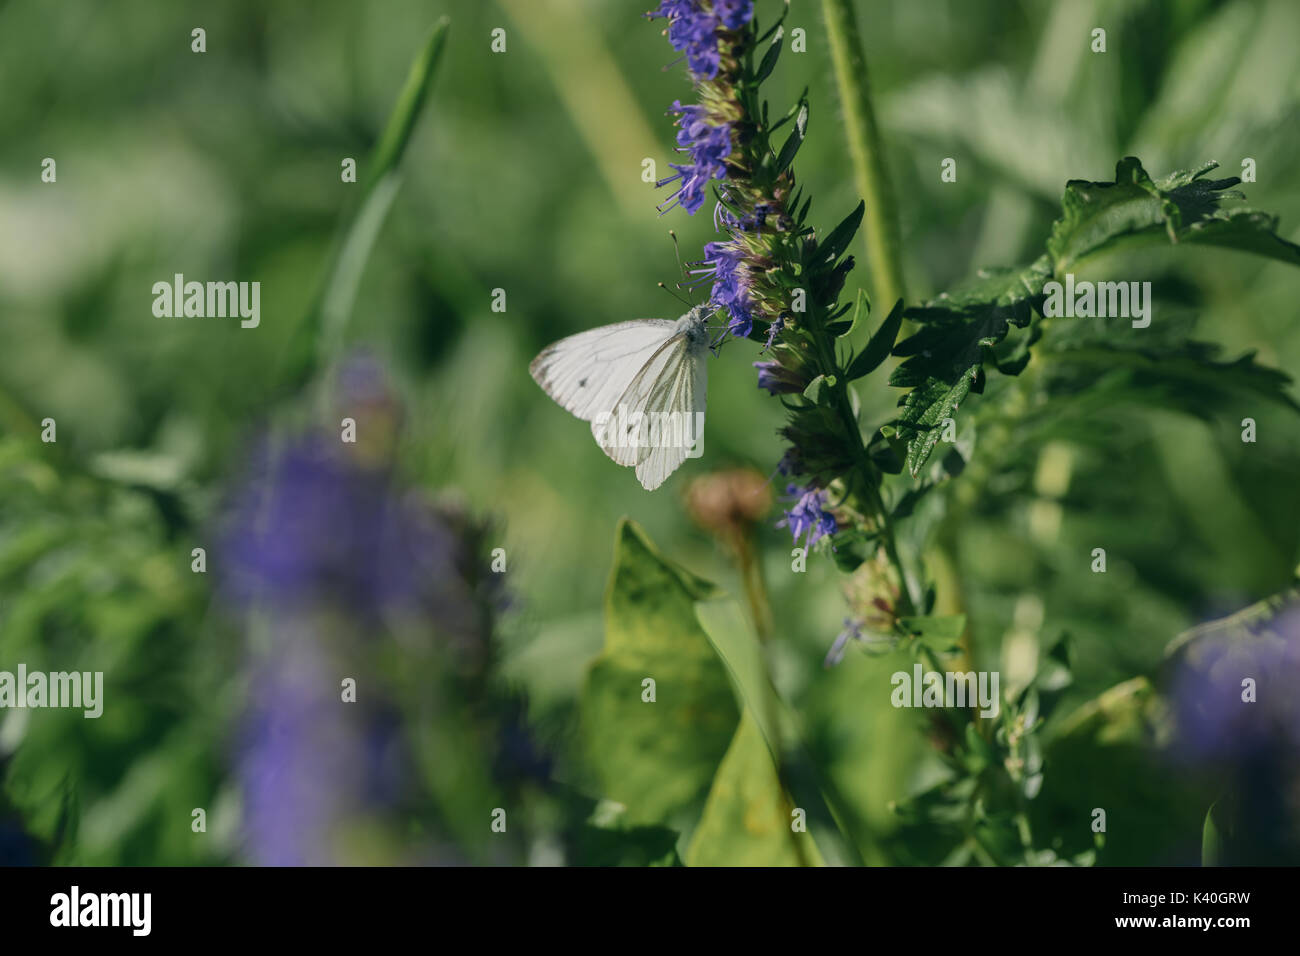 Female european large cabbage and white butterfly feeding on a flower. Stock Photo